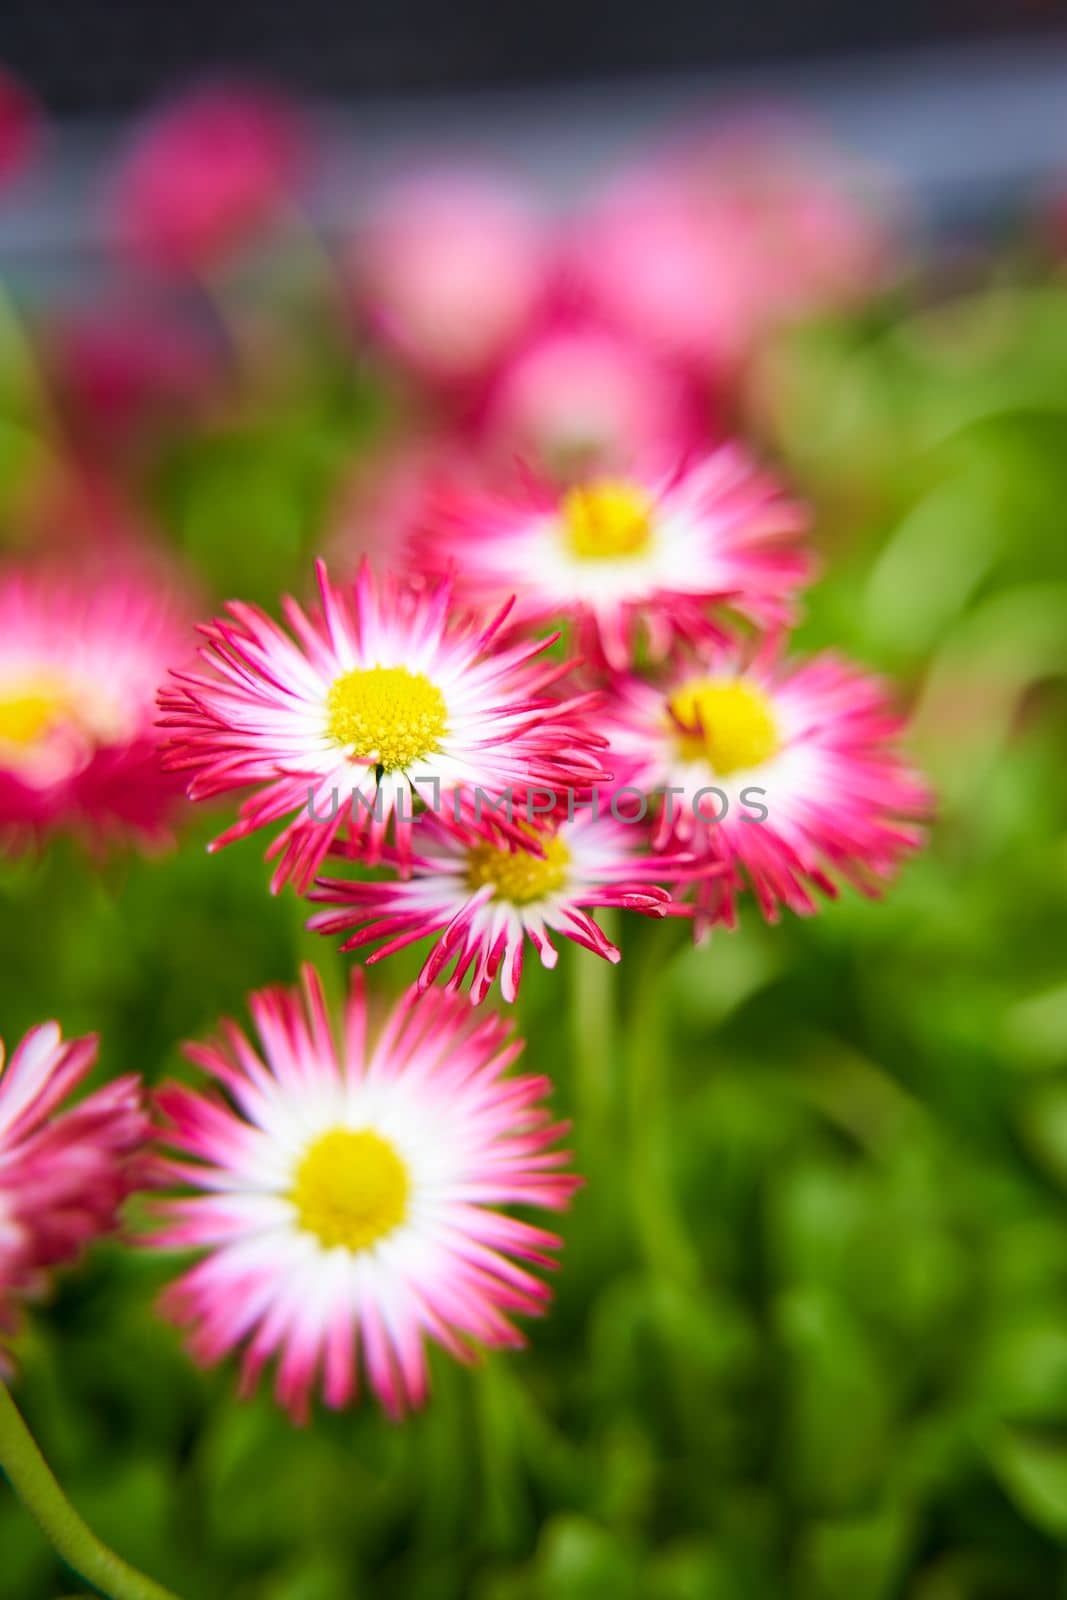 Pink chamomile flower in the green grass by Try_my_best